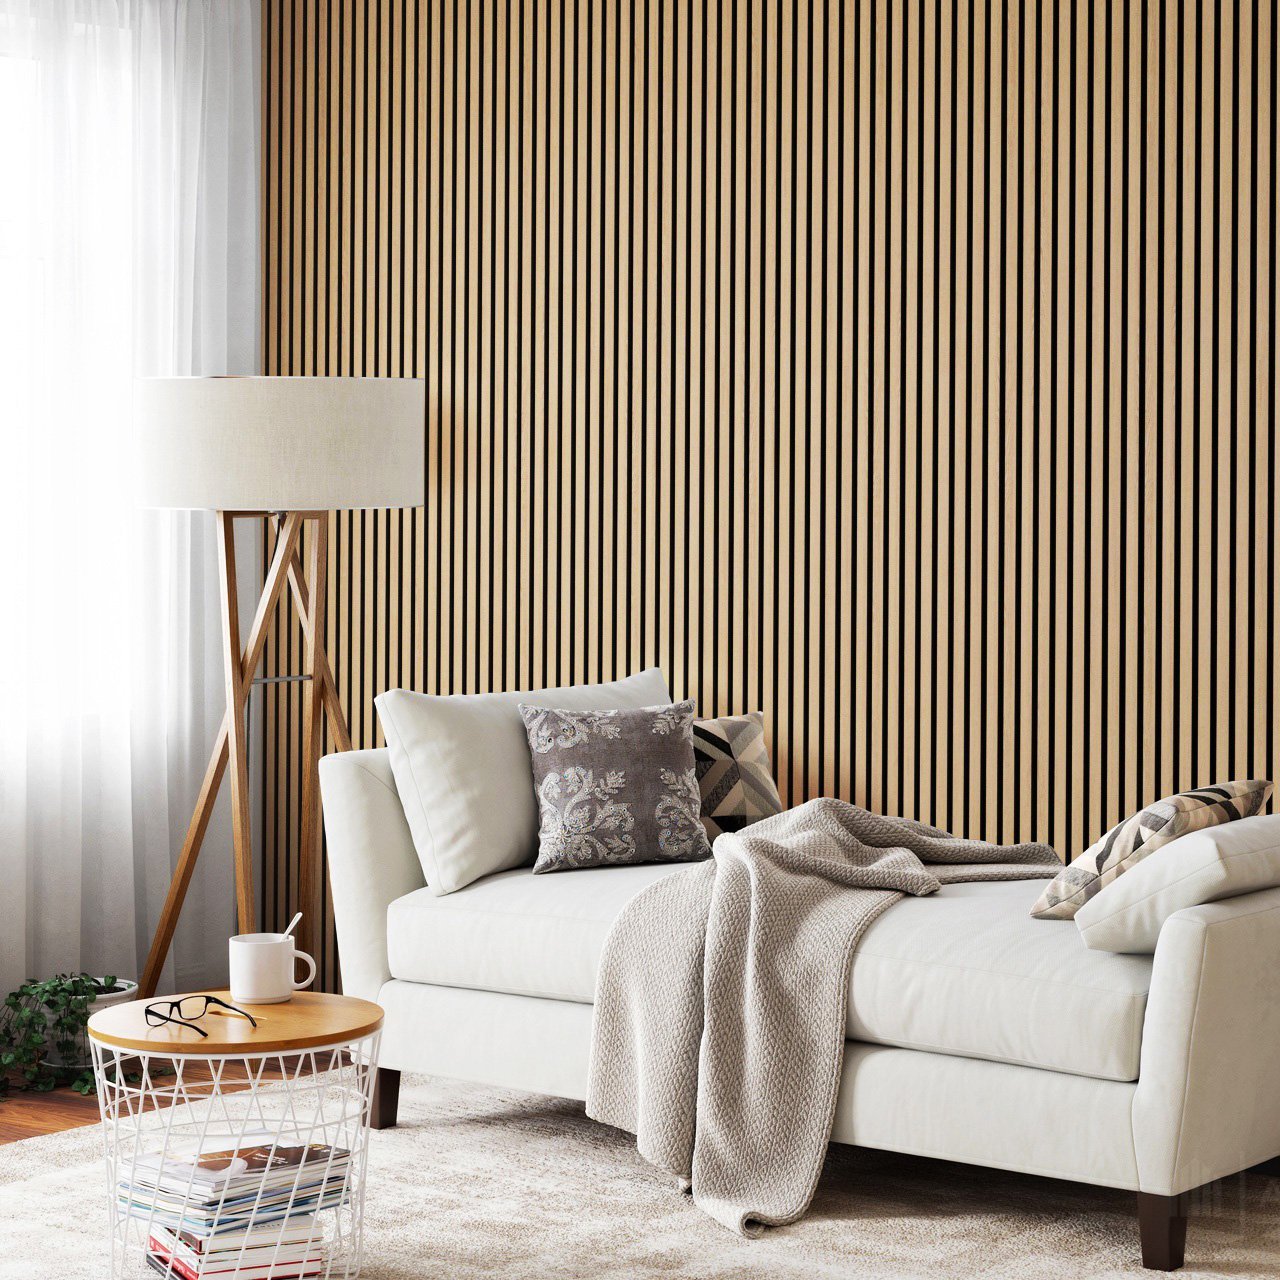 Wood Wall Paneling Ideas for your Living Room